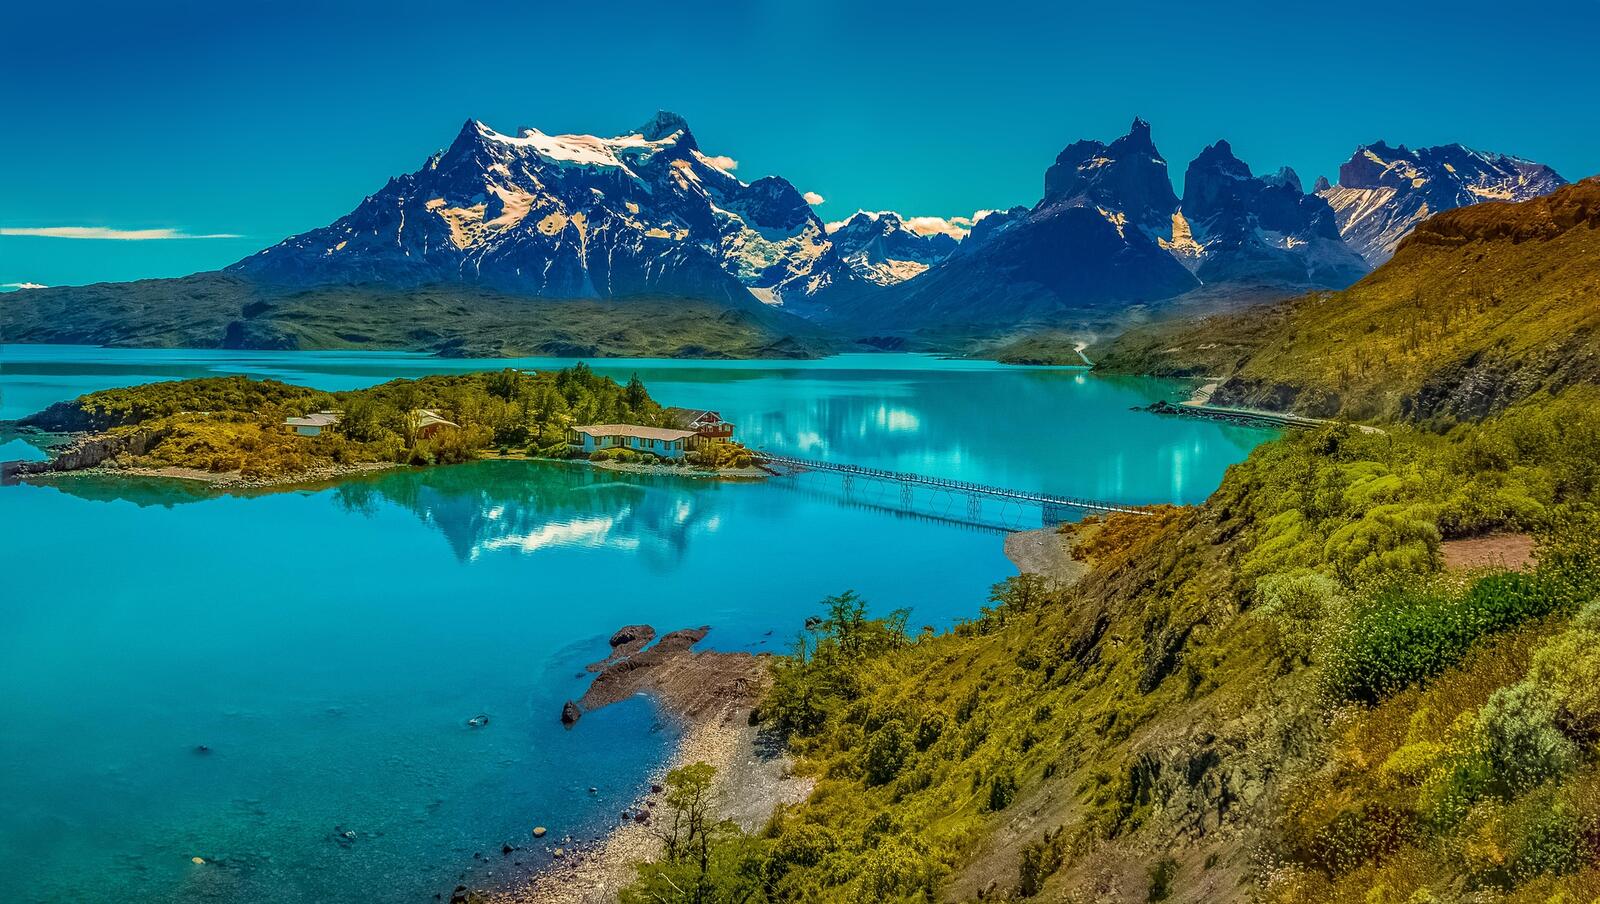 Wallpapers Lake Pehoe Chile mountains on the desktop